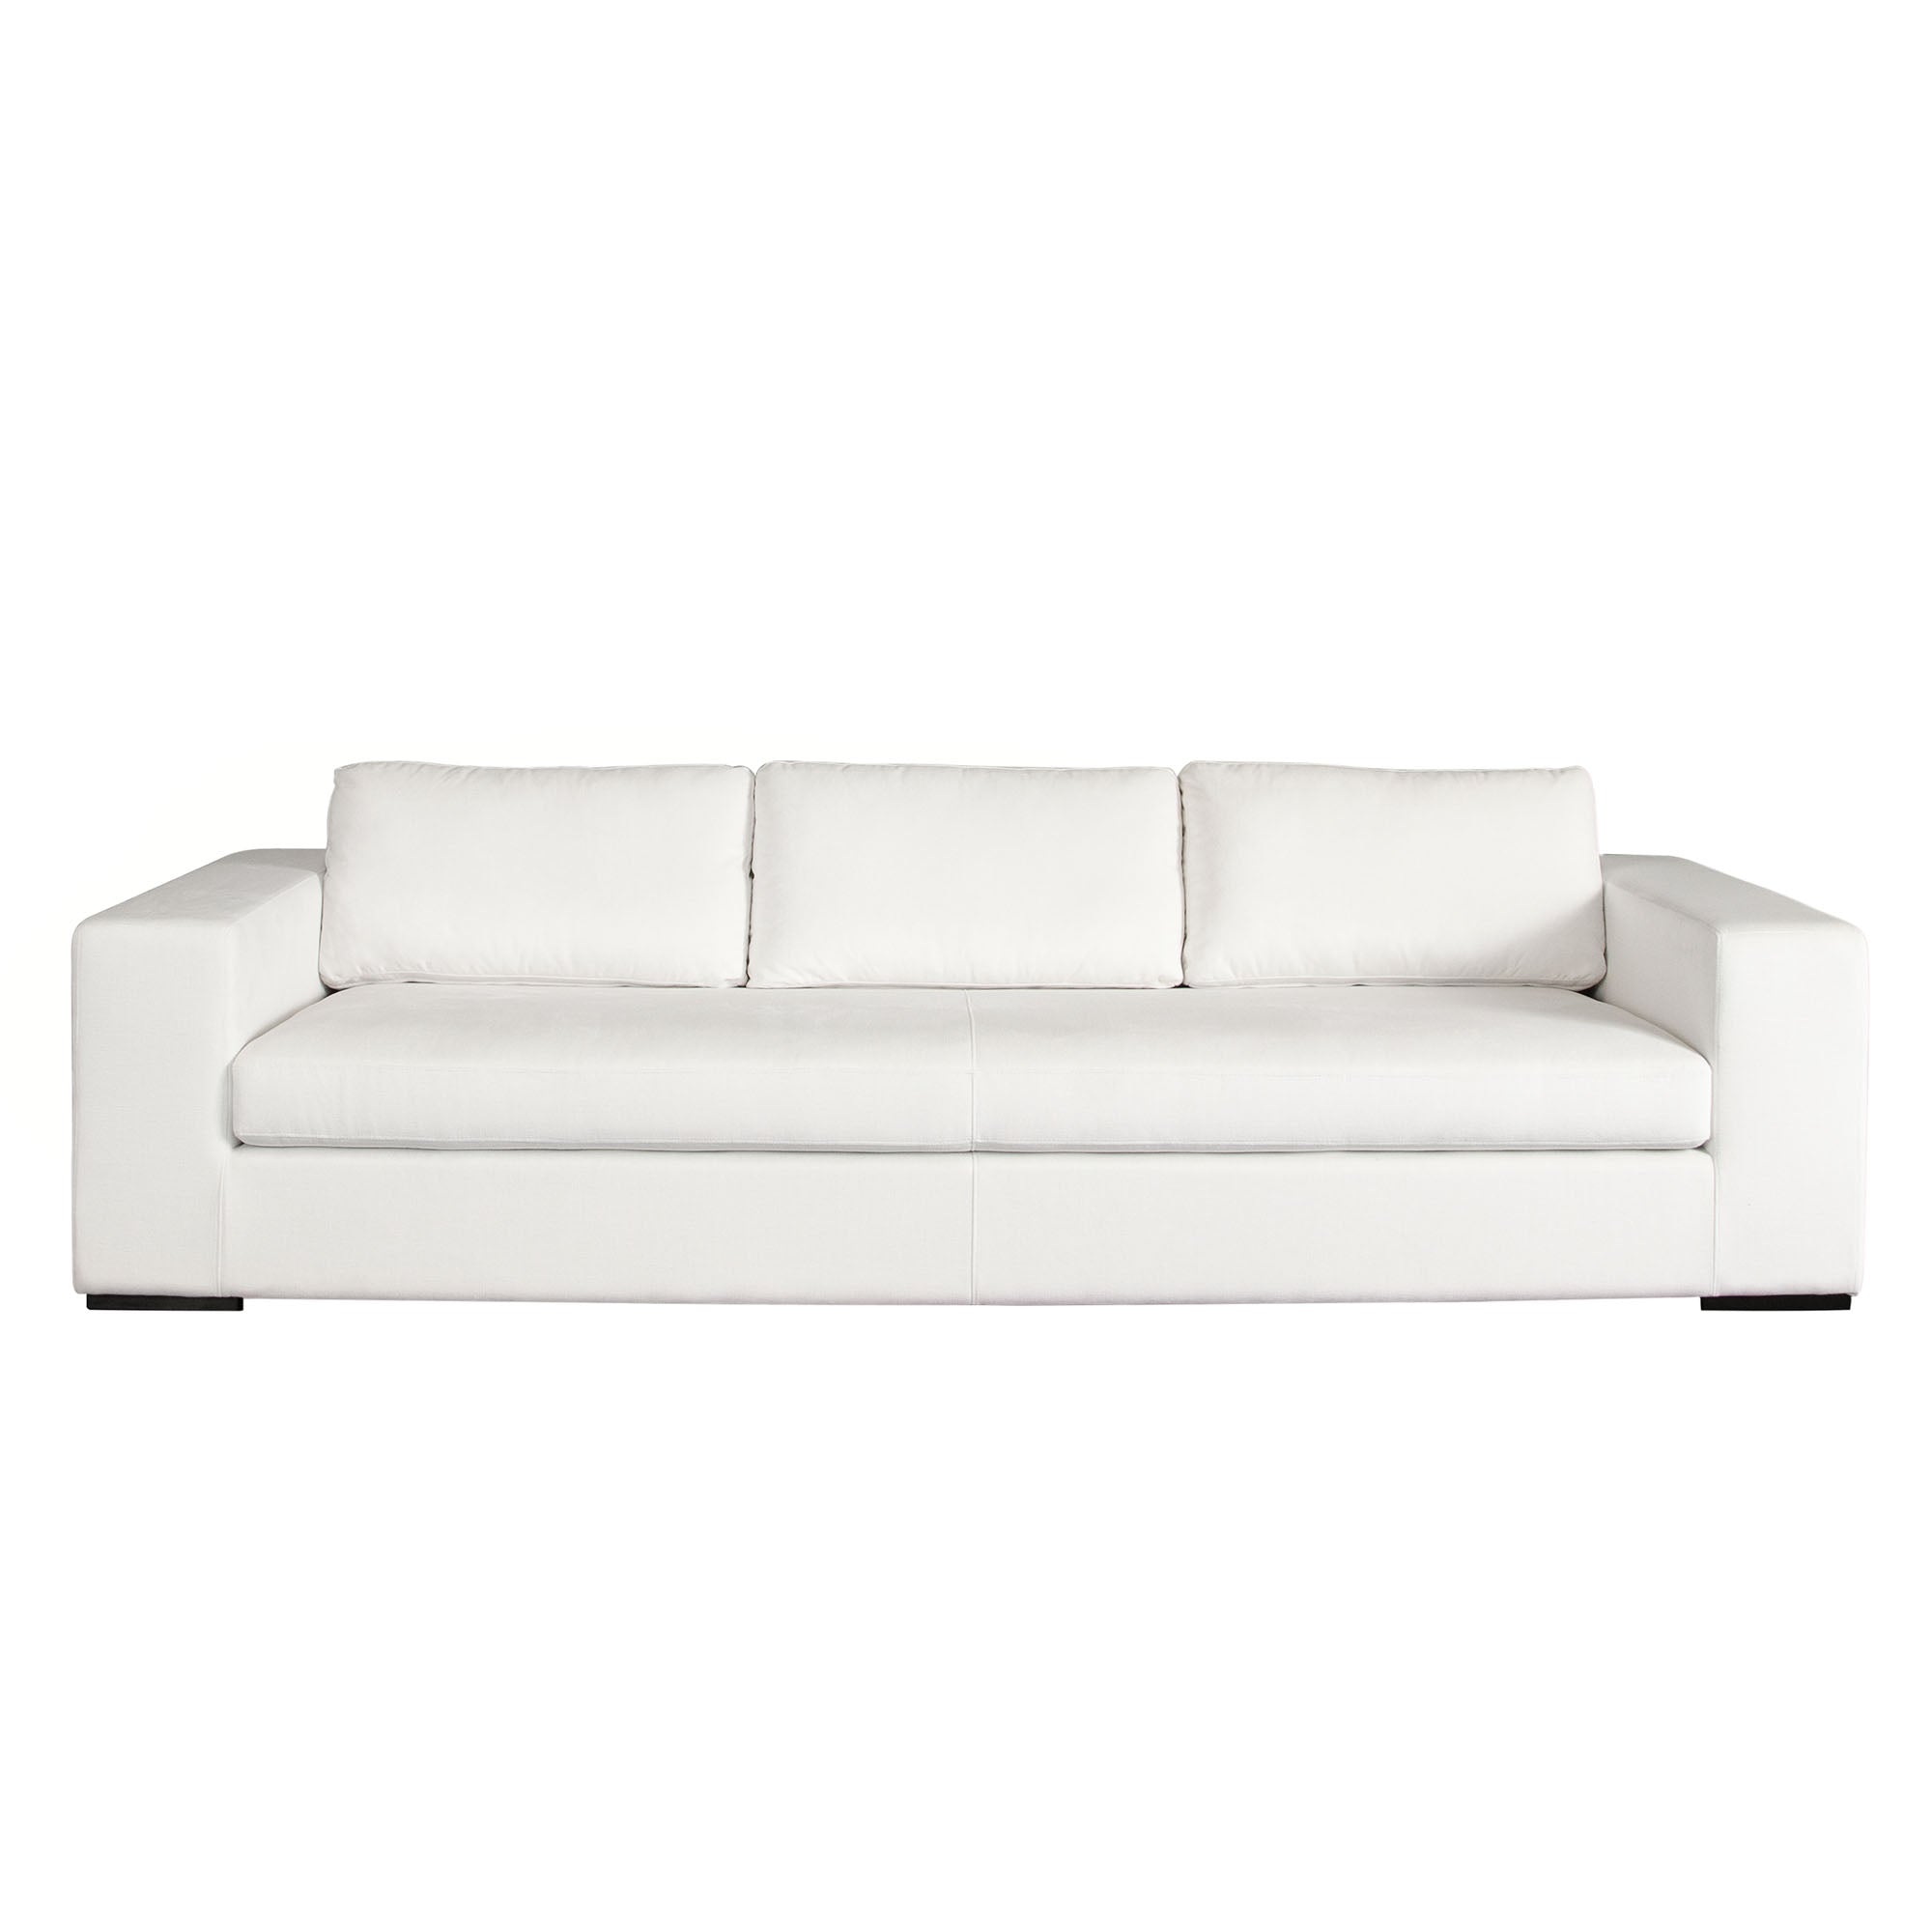 Diamond Sofa Muse Sofa In Mist White Performance Fabric with Four Black Accent Pillows